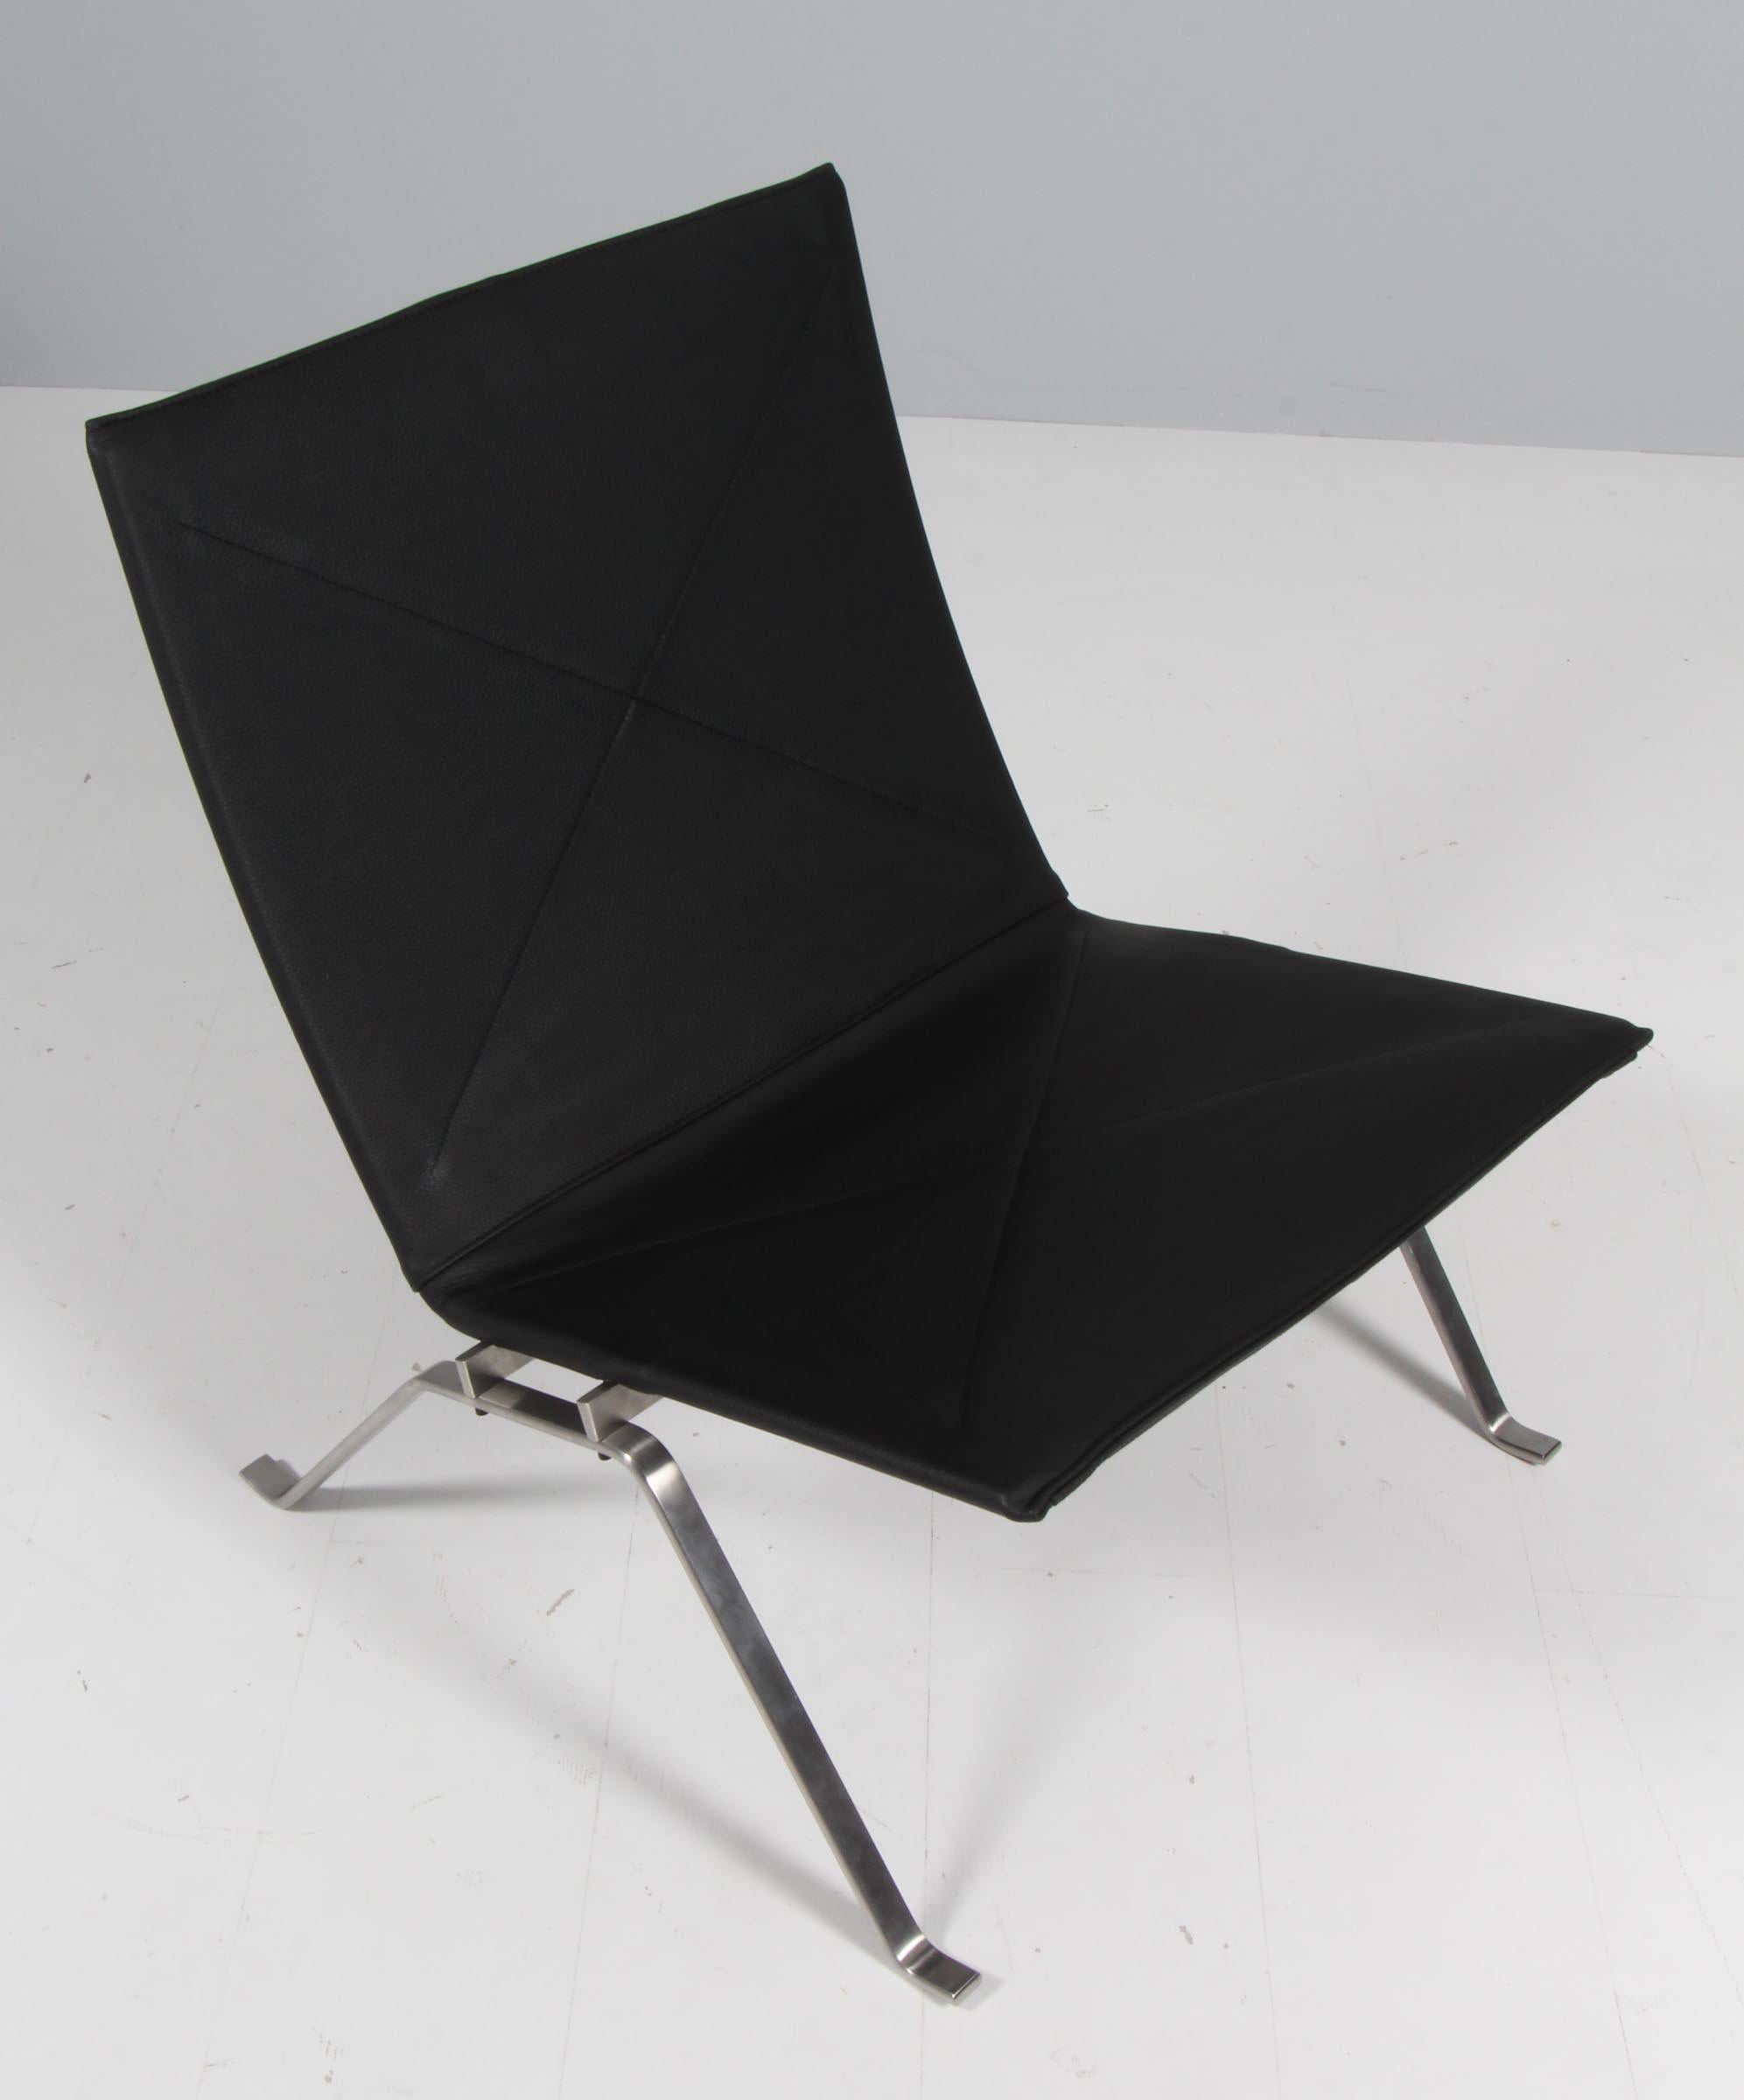 Poul Kjærholm lounge chair new upholstered with black leather

Frame of brushed steel.

Model PK22, made by Fritz Hansen.